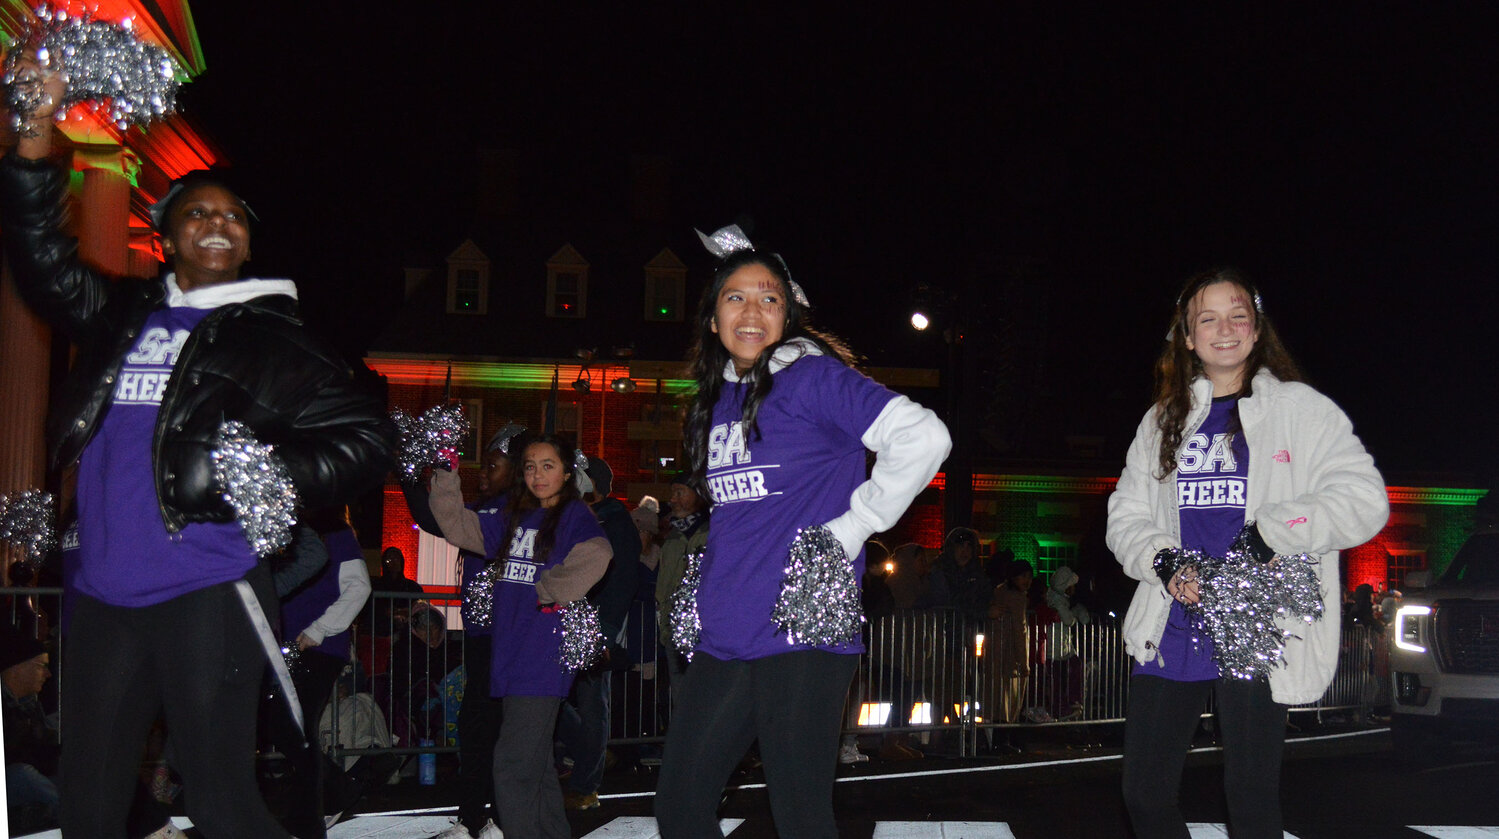 Members of the Sussex Academy cheer squad show their spirit in the Georgetown Christmas Parade on Thursday.